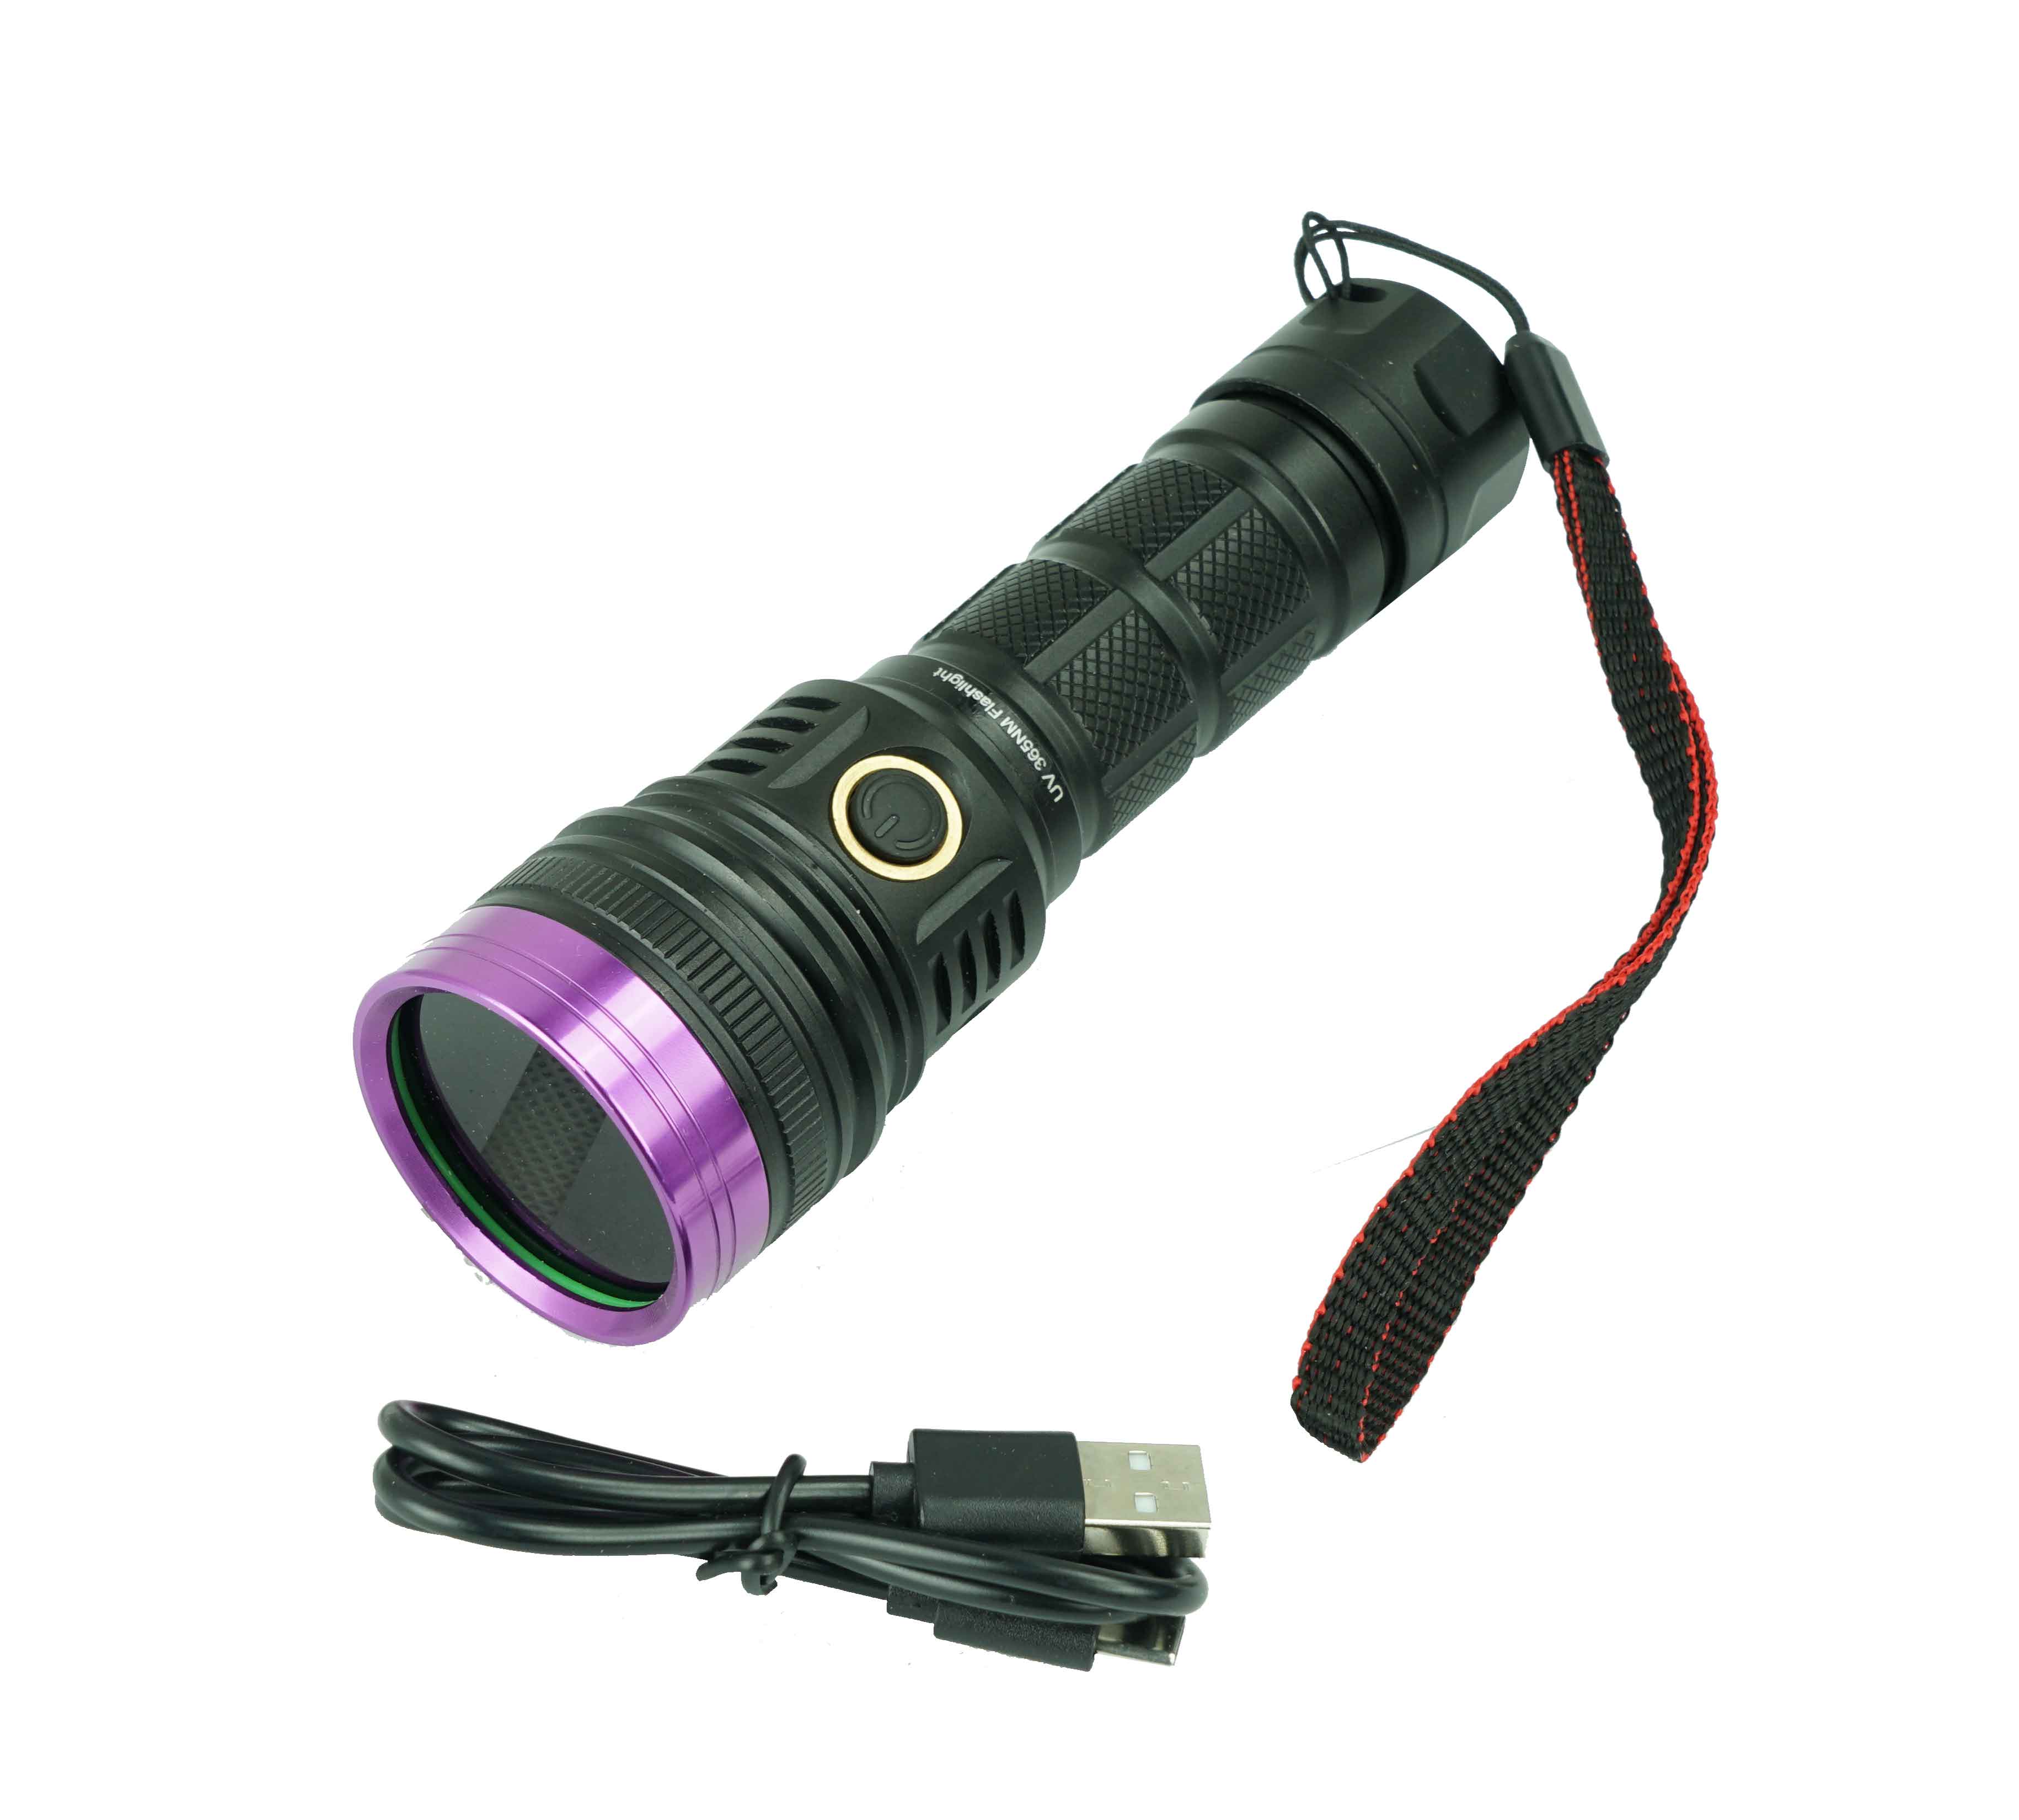 50527 - USB-C-Rechargeable-365nm-UV-Flashlight-with-Black-FilterMaterial-Aluminum-Alloy-Size-14-54-53-0cm-185gIP65-water-resistant-rain-proofLED-source-UV-365nm-LED-max-ouput-12W-Operation-Modes-2modes-high-low-Lighting-distance-20metersBattery-type-121700-li-ion-battery-4500mah-include-Lighting-time-2-4-HrsPacking-Detailsunit-pack-white-boxbox-size-16-5X6-5X6-5cmunit-weight-200g50-units-per-cartoncarton-size-39X32X34cmGross-weight-11-5KG